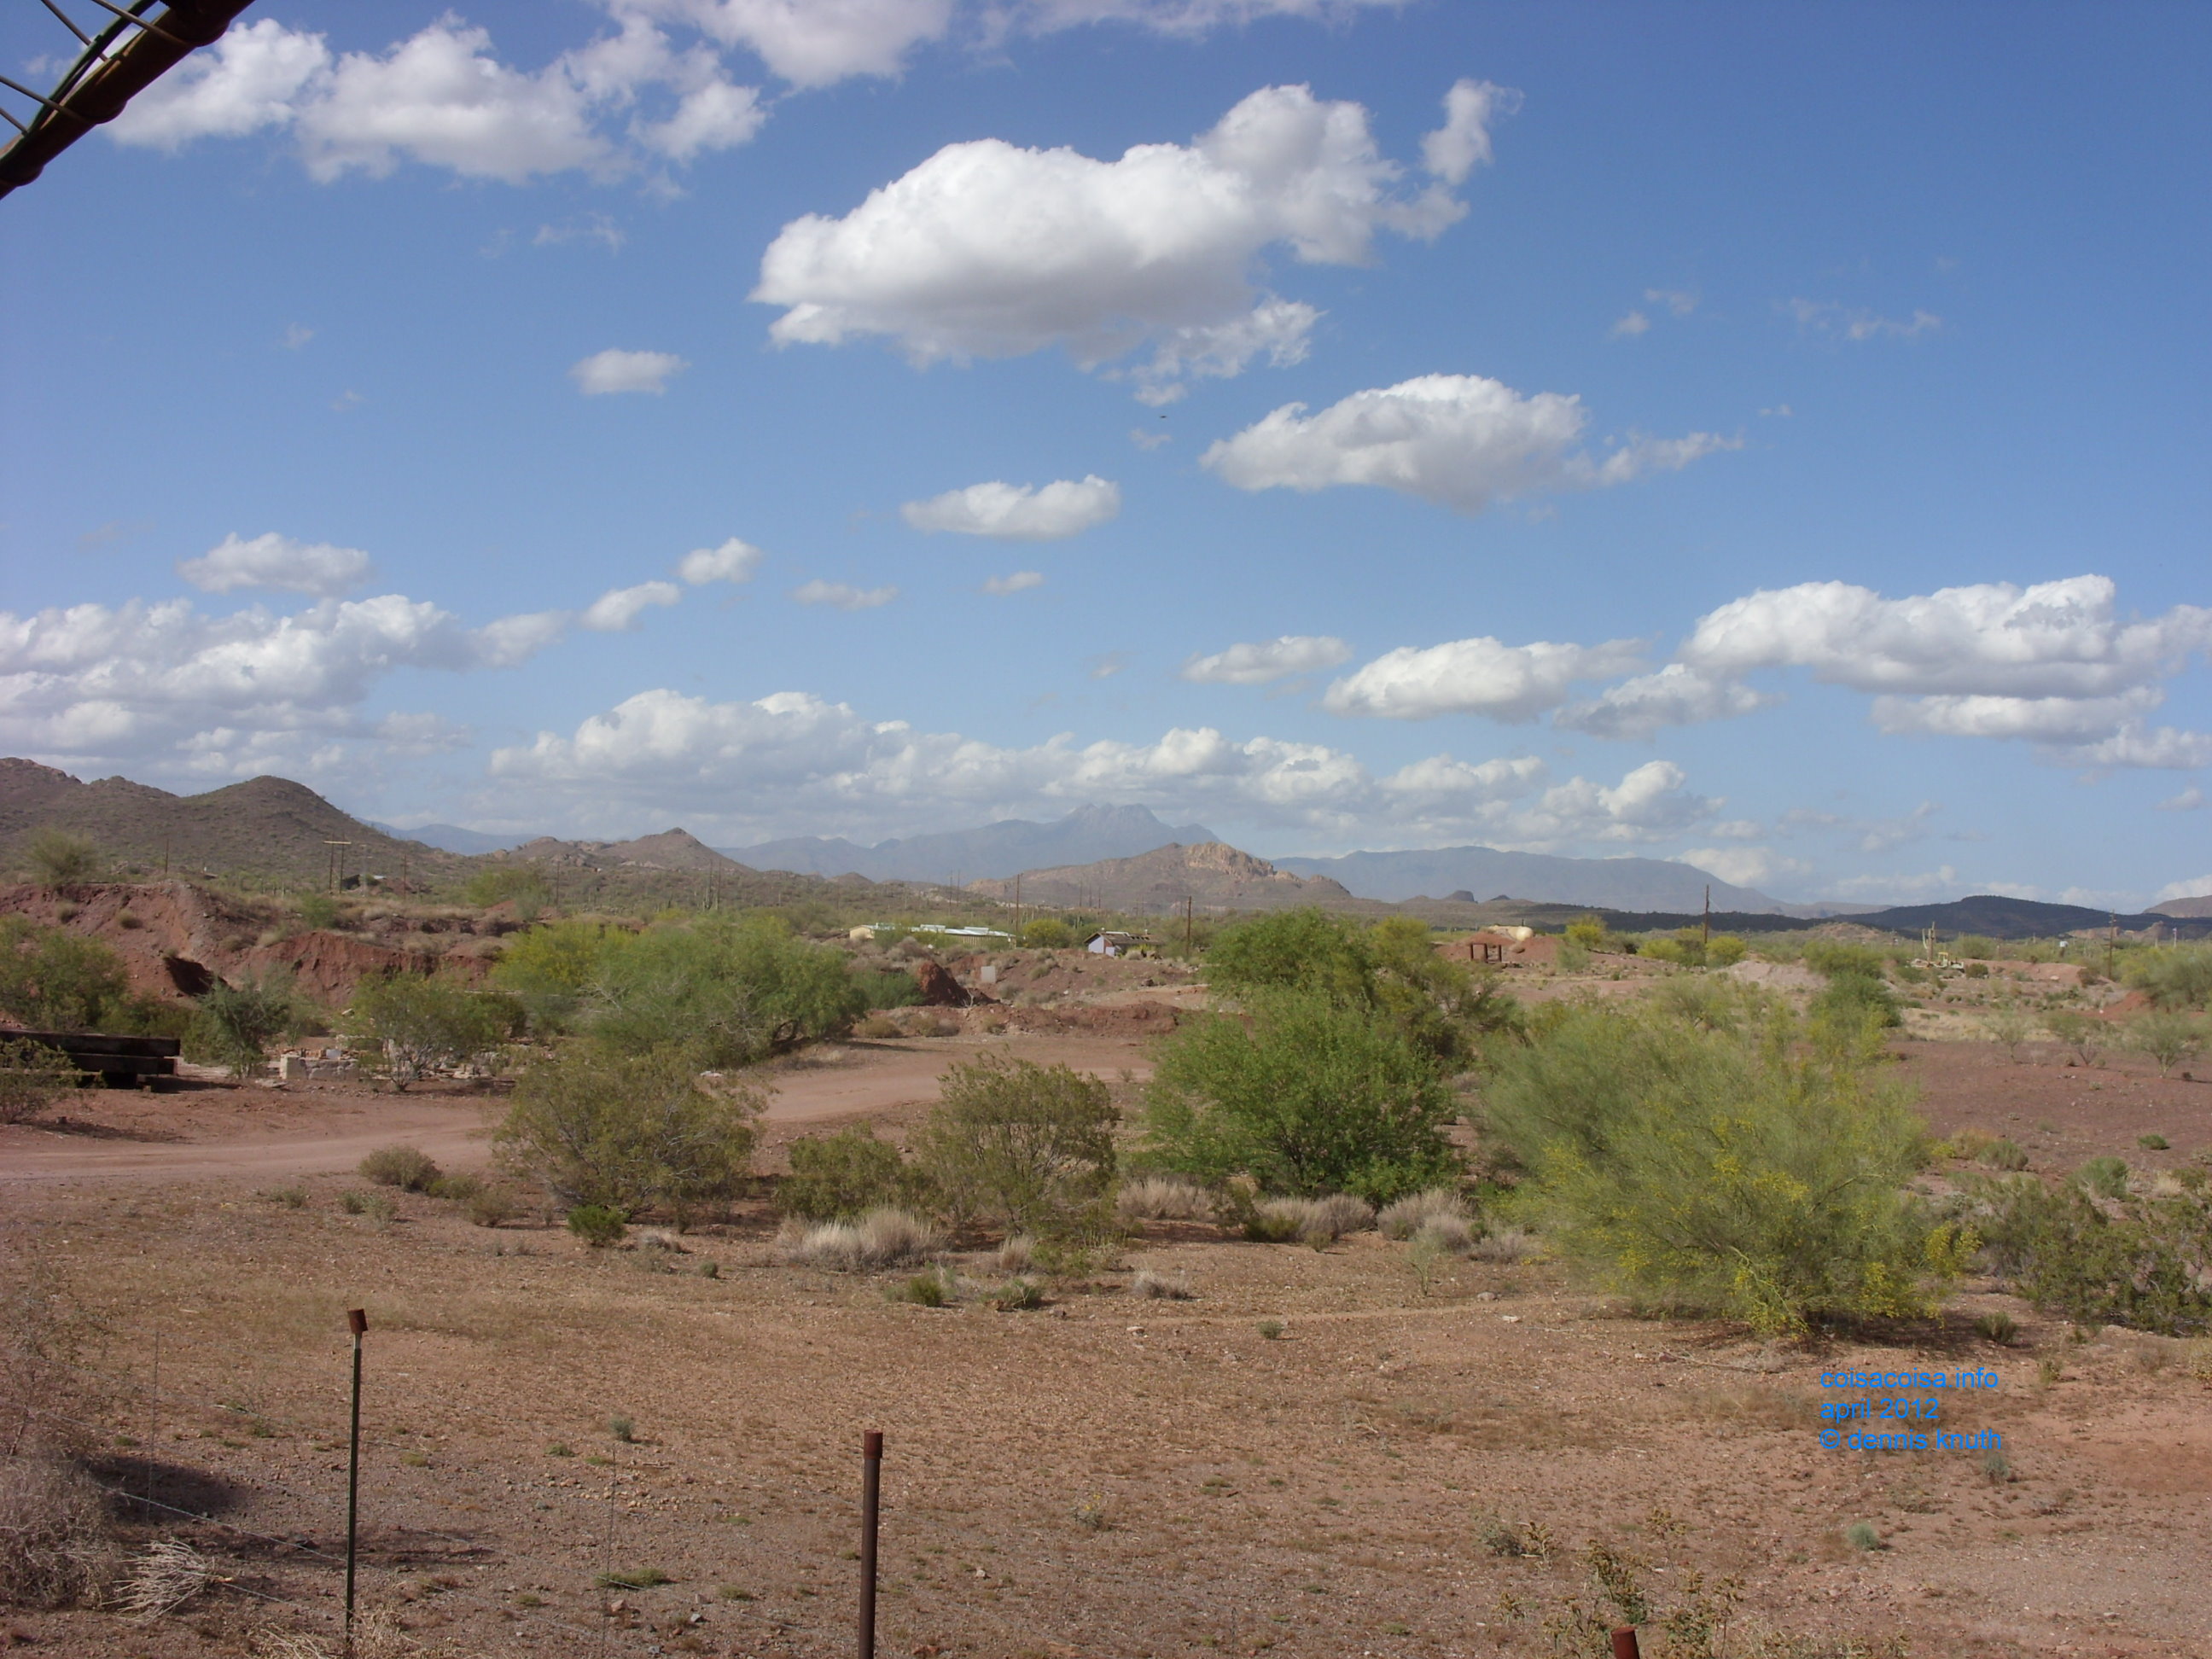 2012_04_26_e_apache_junction_ghost_town_0017.jpg (large)